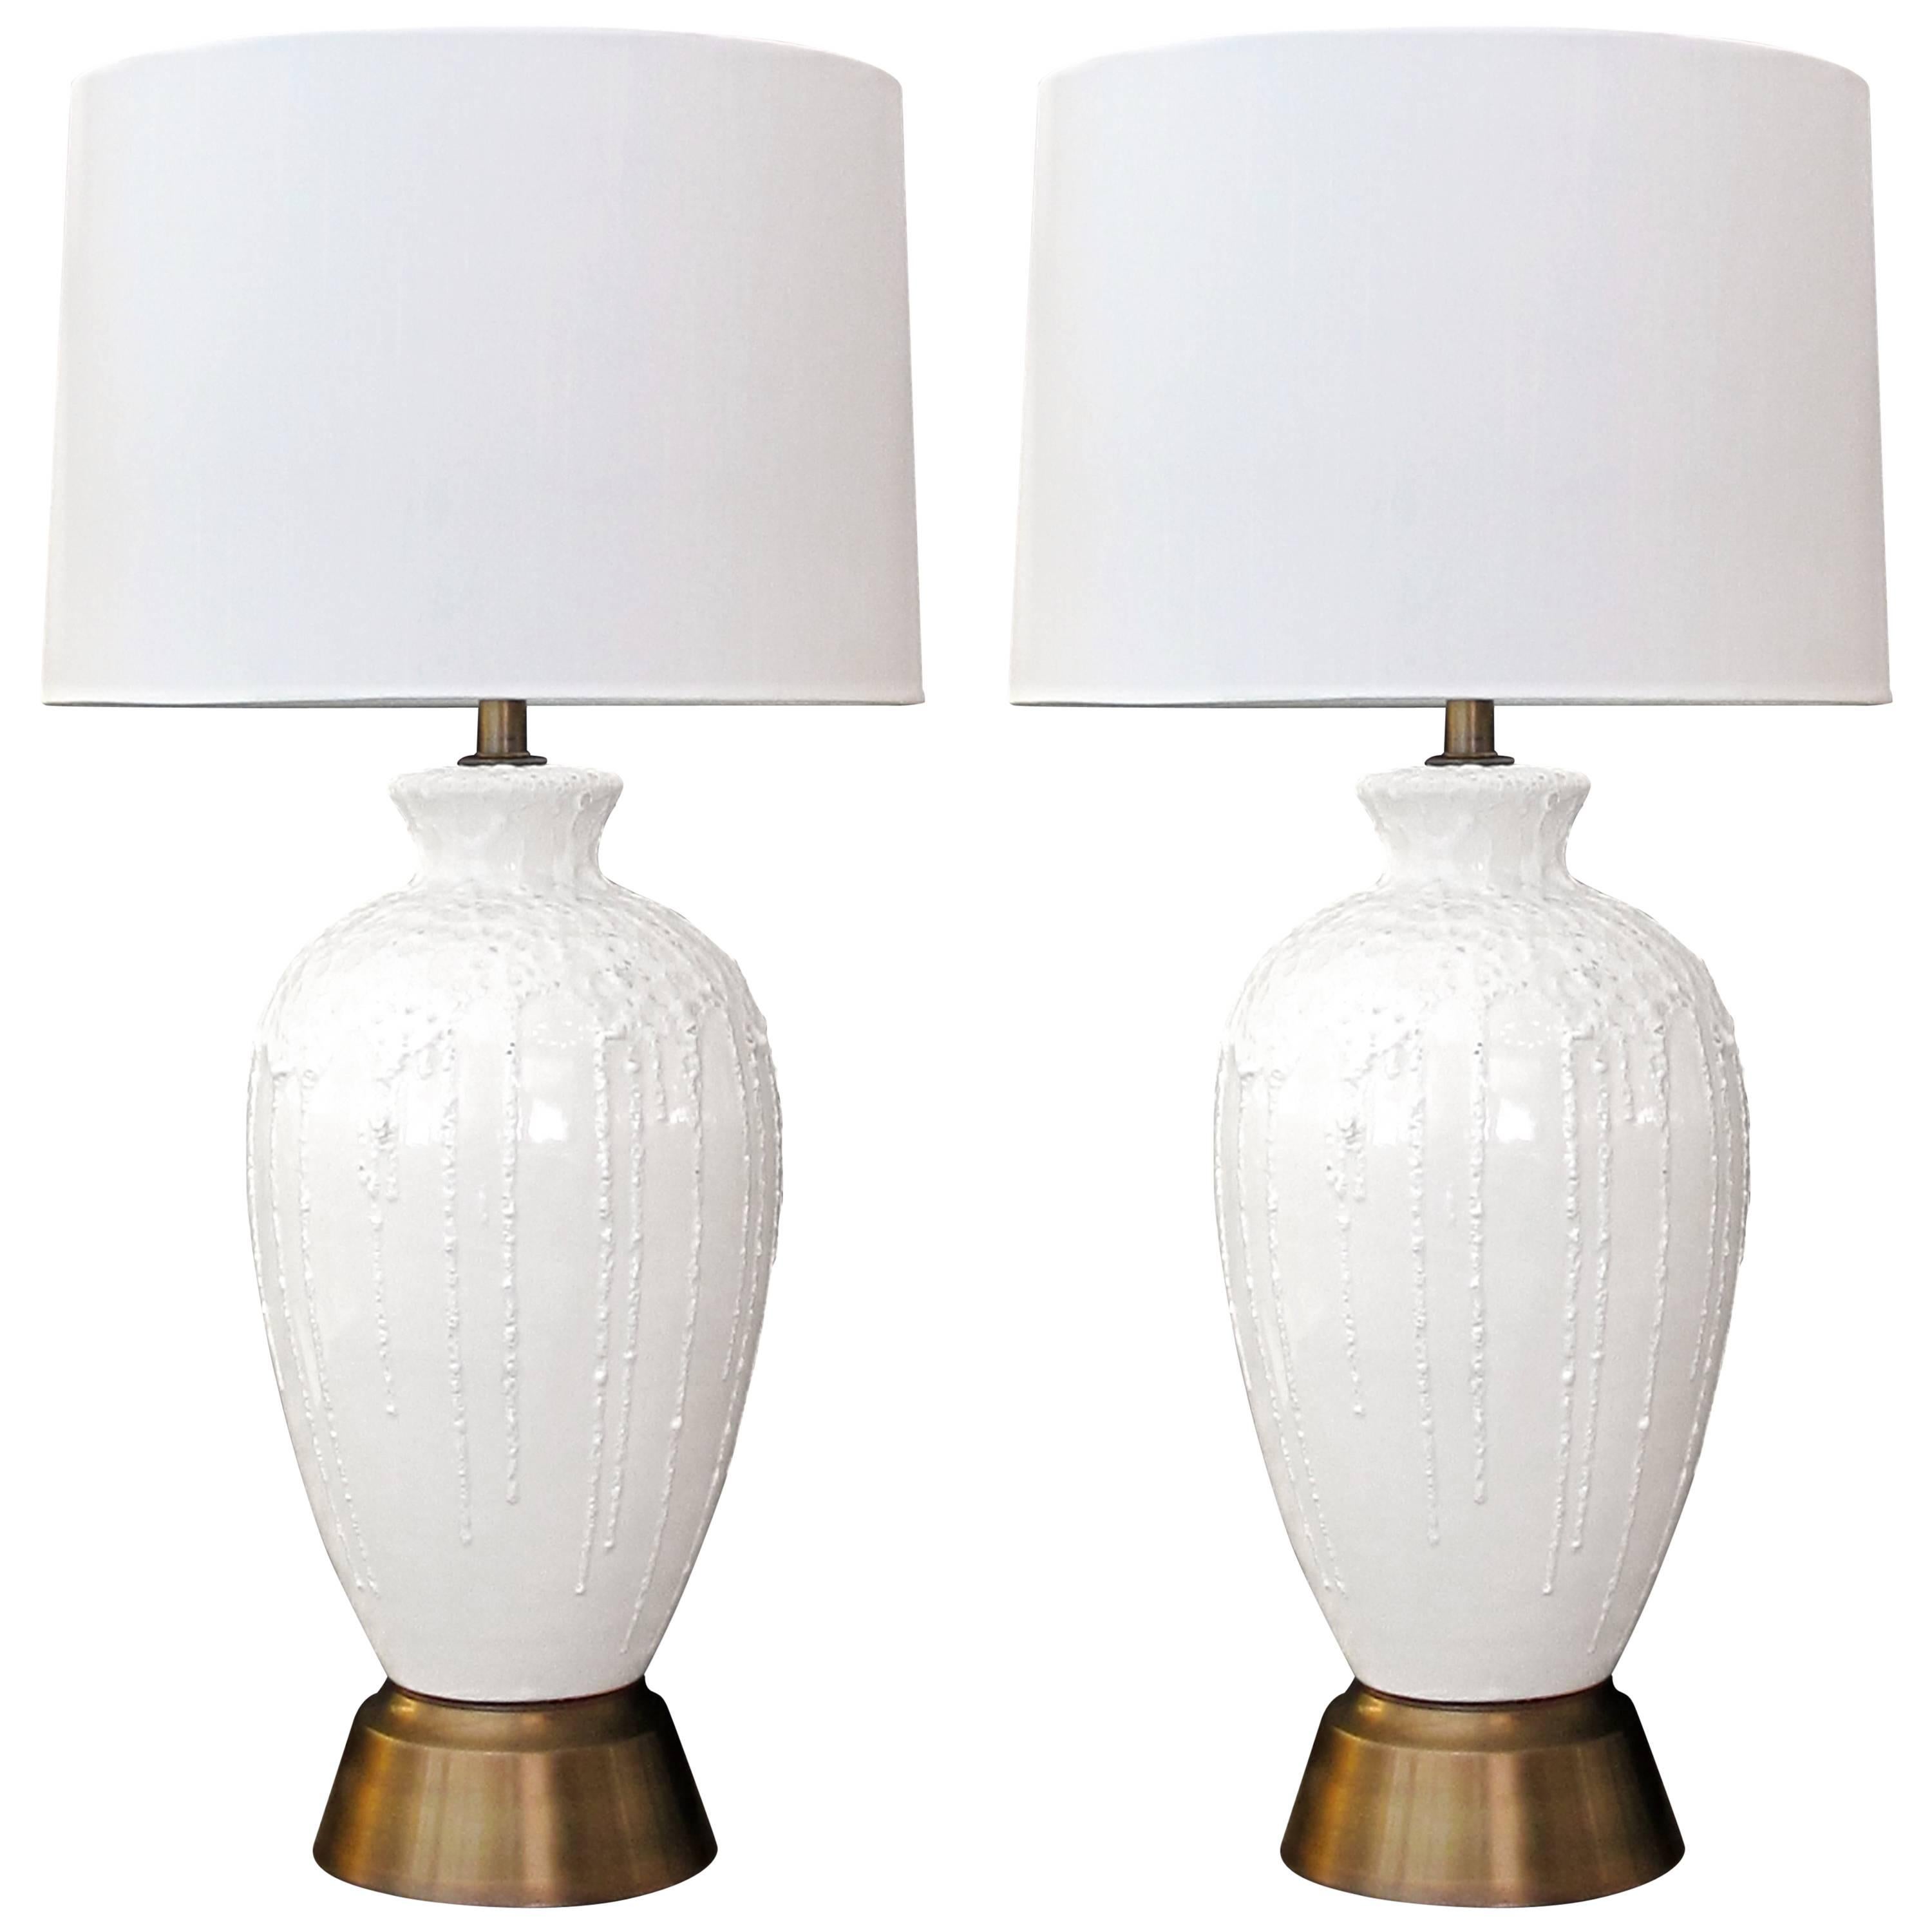 Boldly-Scaled American 1960s White Crater-Glazed Ovoid Form Ceramic Lamps, Pair